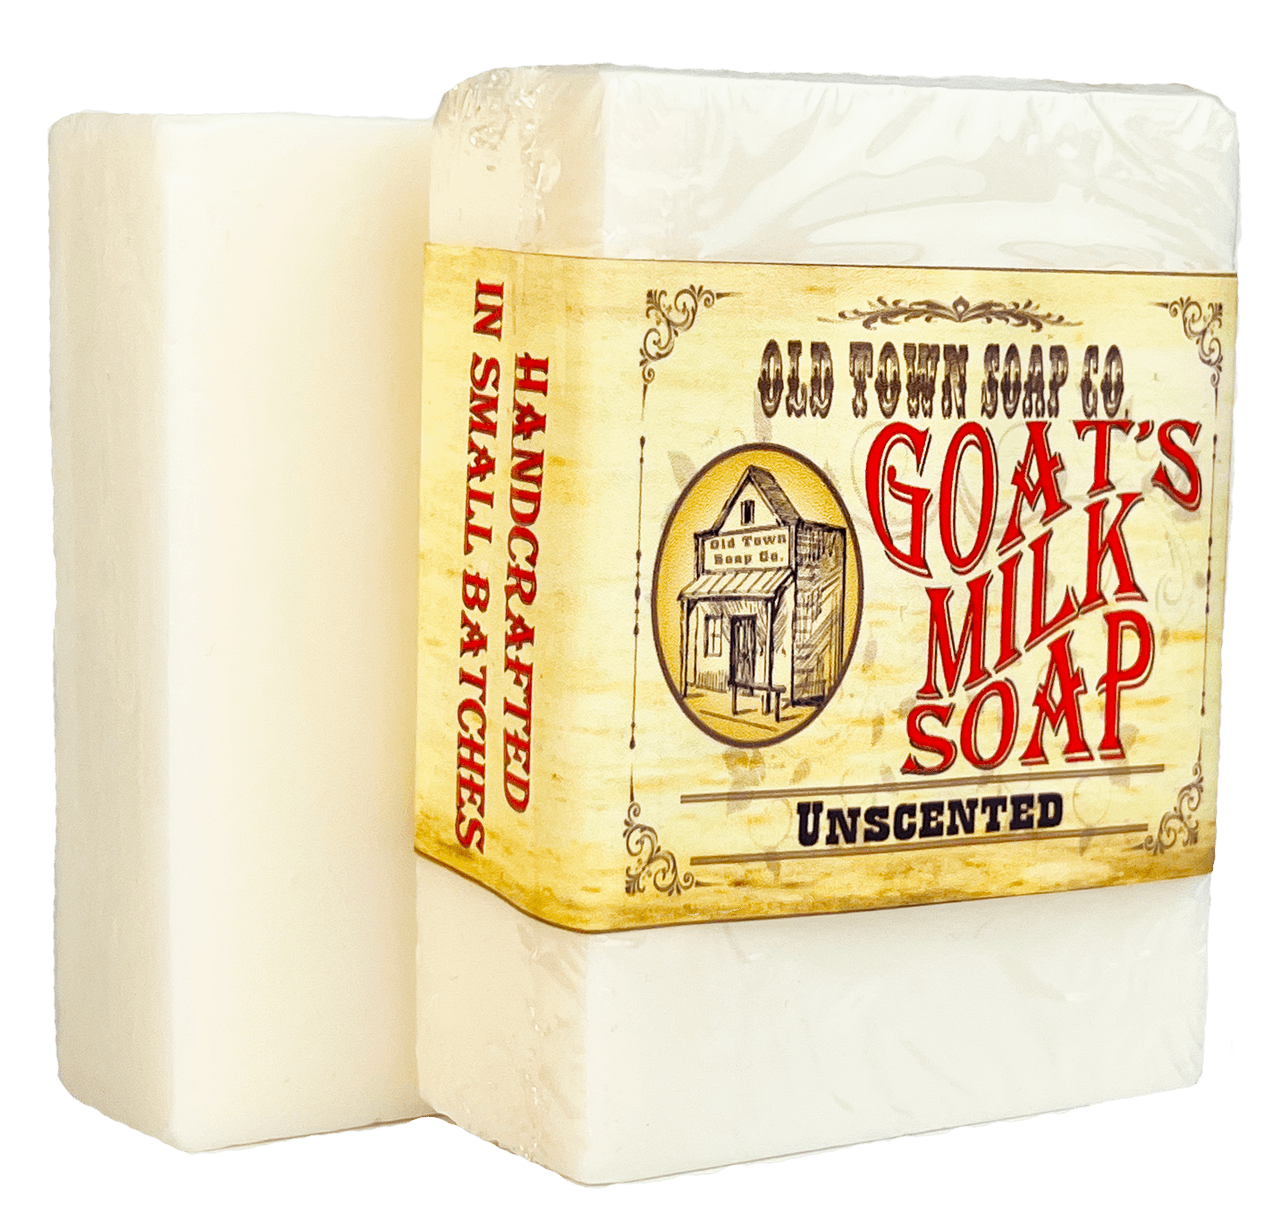 Unscented -Goat&